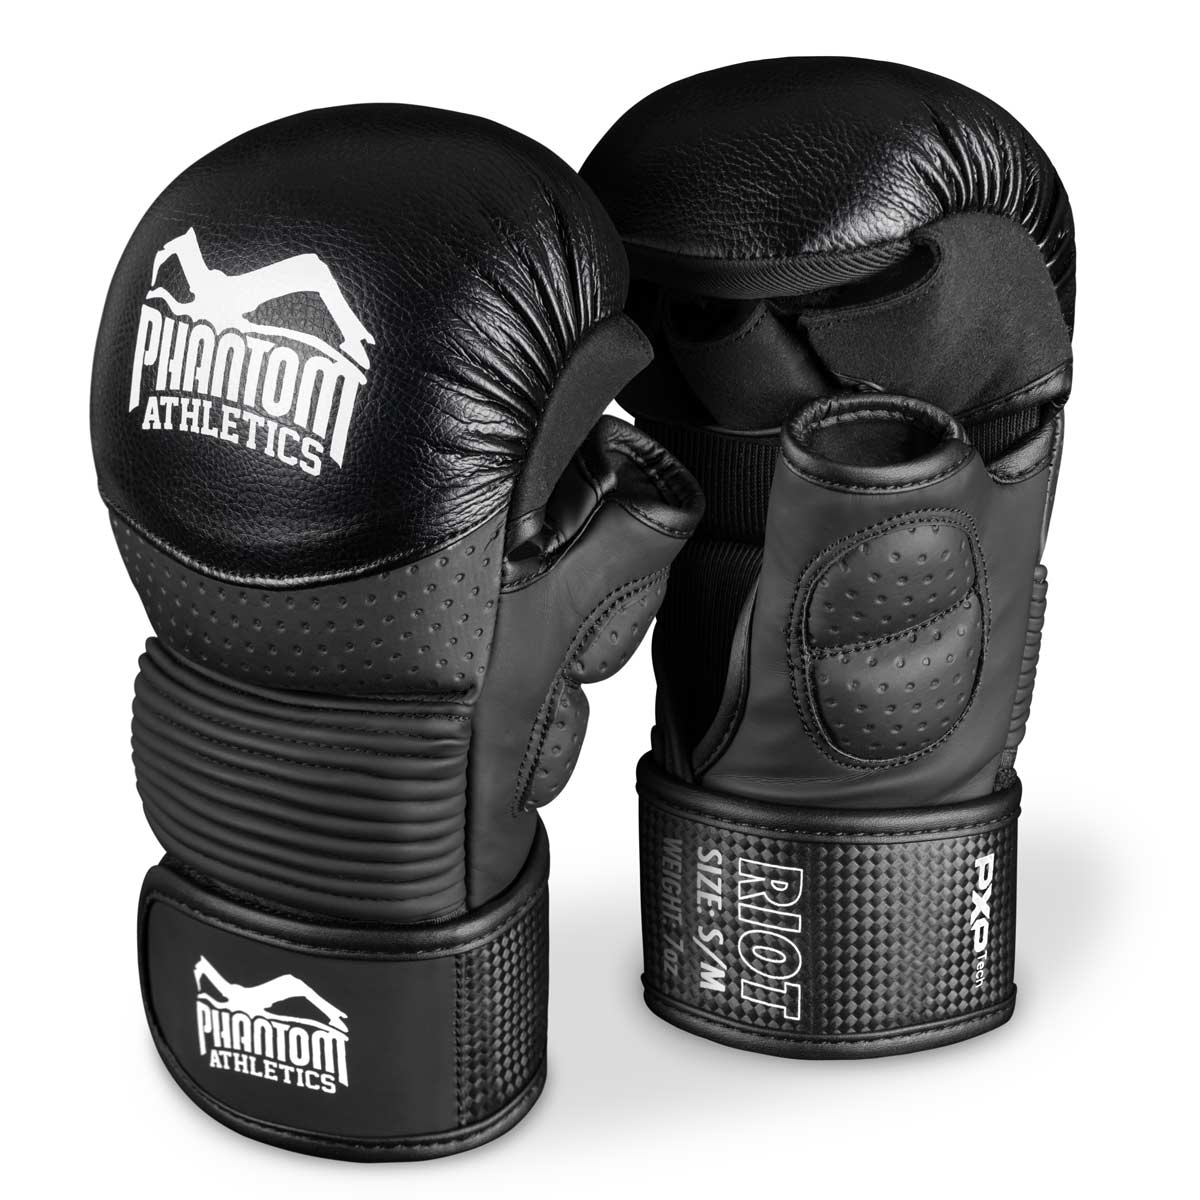 Buy MMA gloves for sparring & competition - PHANTOM ATHLETICS